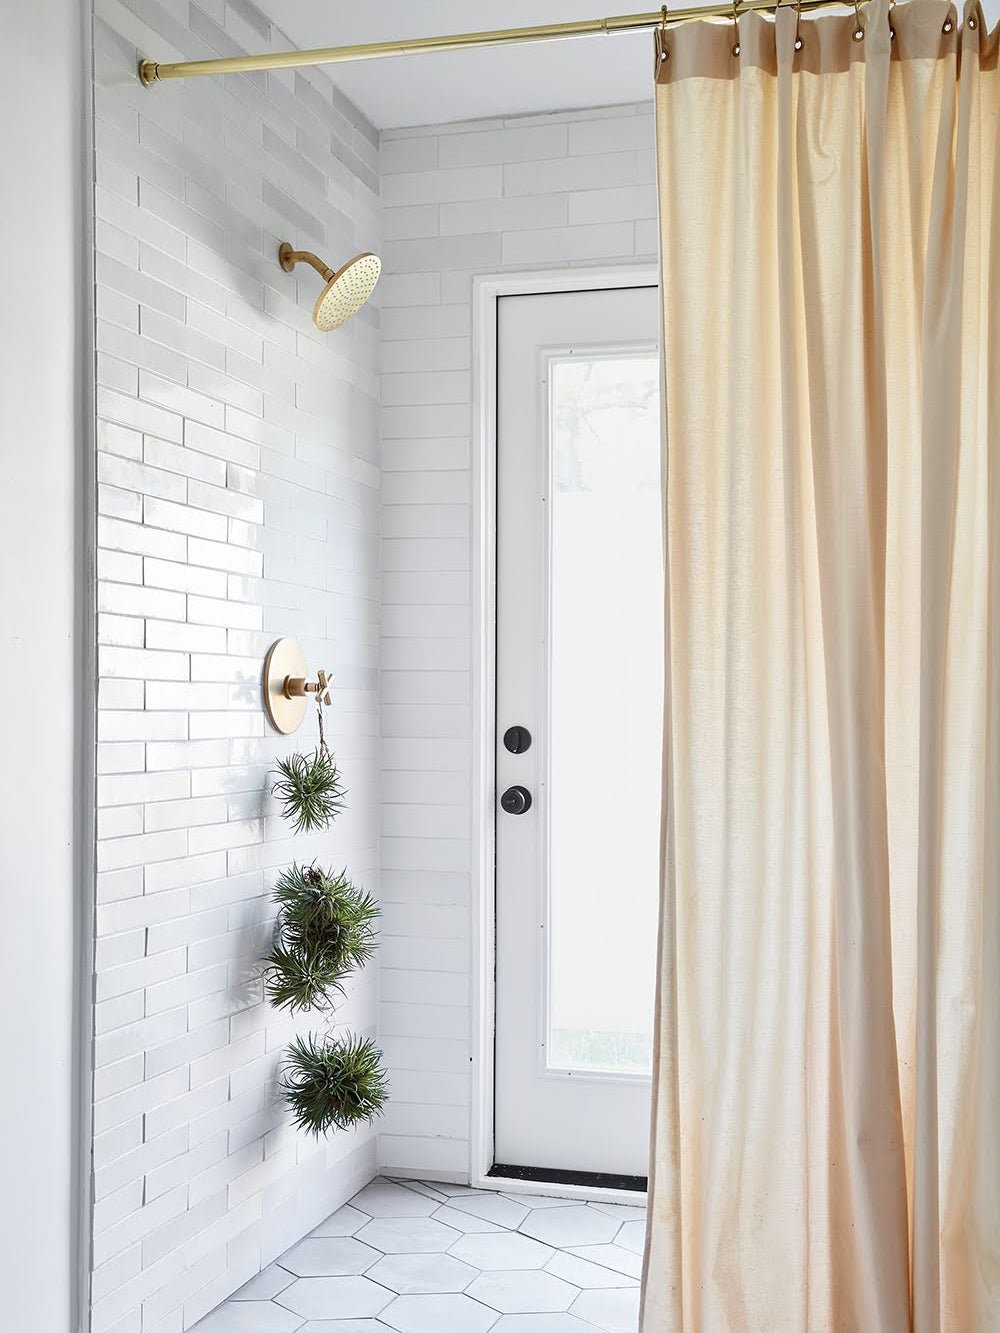 We Could All Use This Calming Bathroom Upgrade (No, It’s Not Eucalyptus)